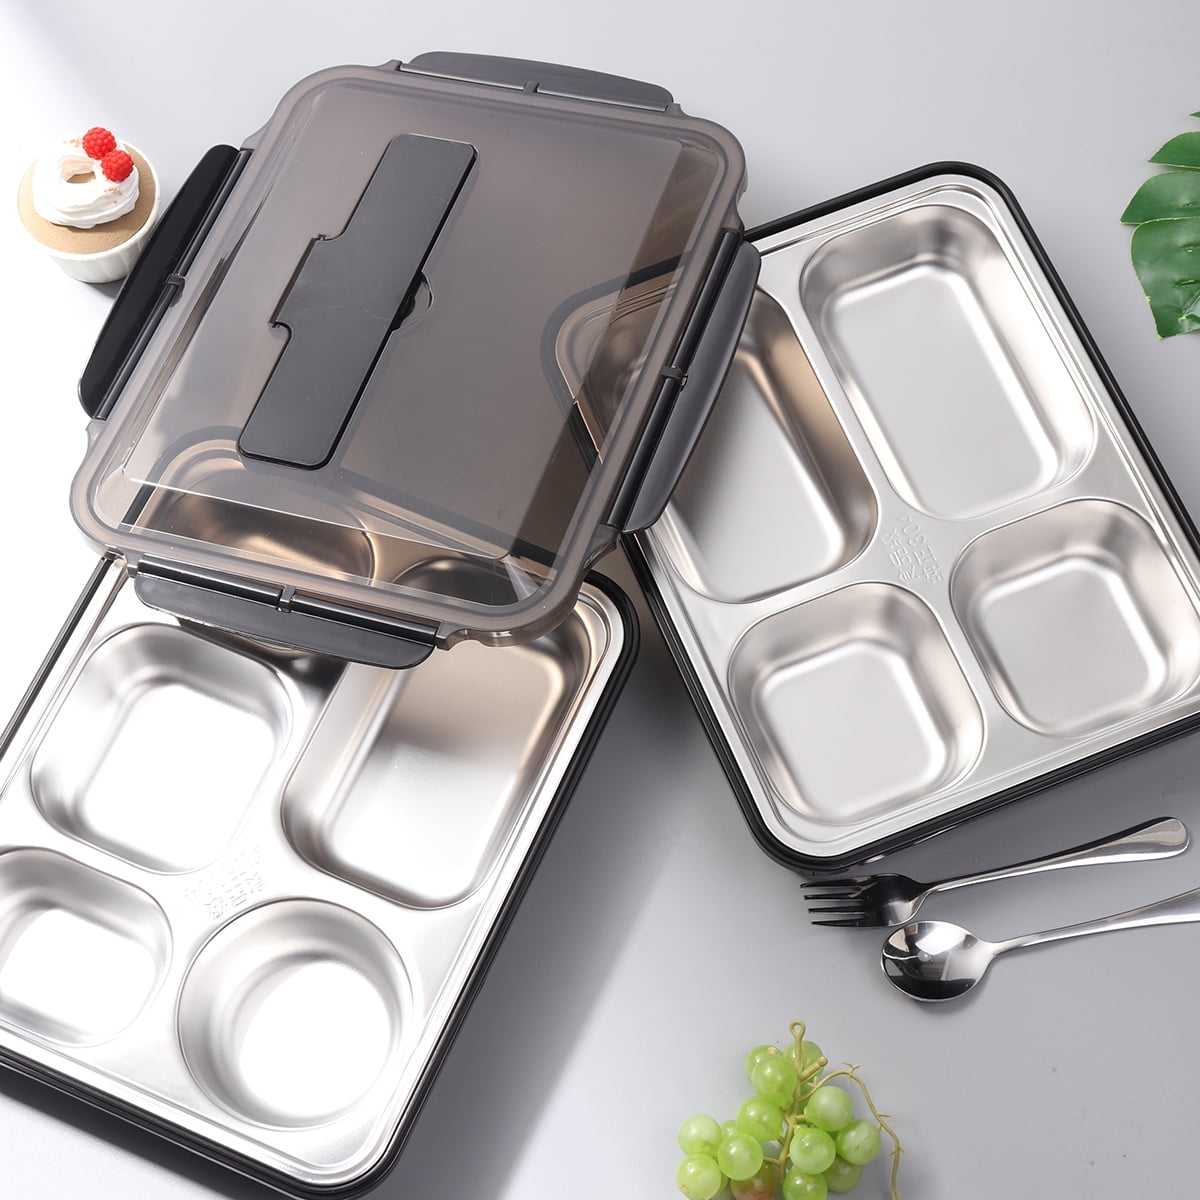 Bento Box,1500ml Stainless Steel Lunch Box,Versatile 4-Compartment Portable  Lunch Box Container-Sala…See more Bento Box,1500ml Stainless Steel Lunch